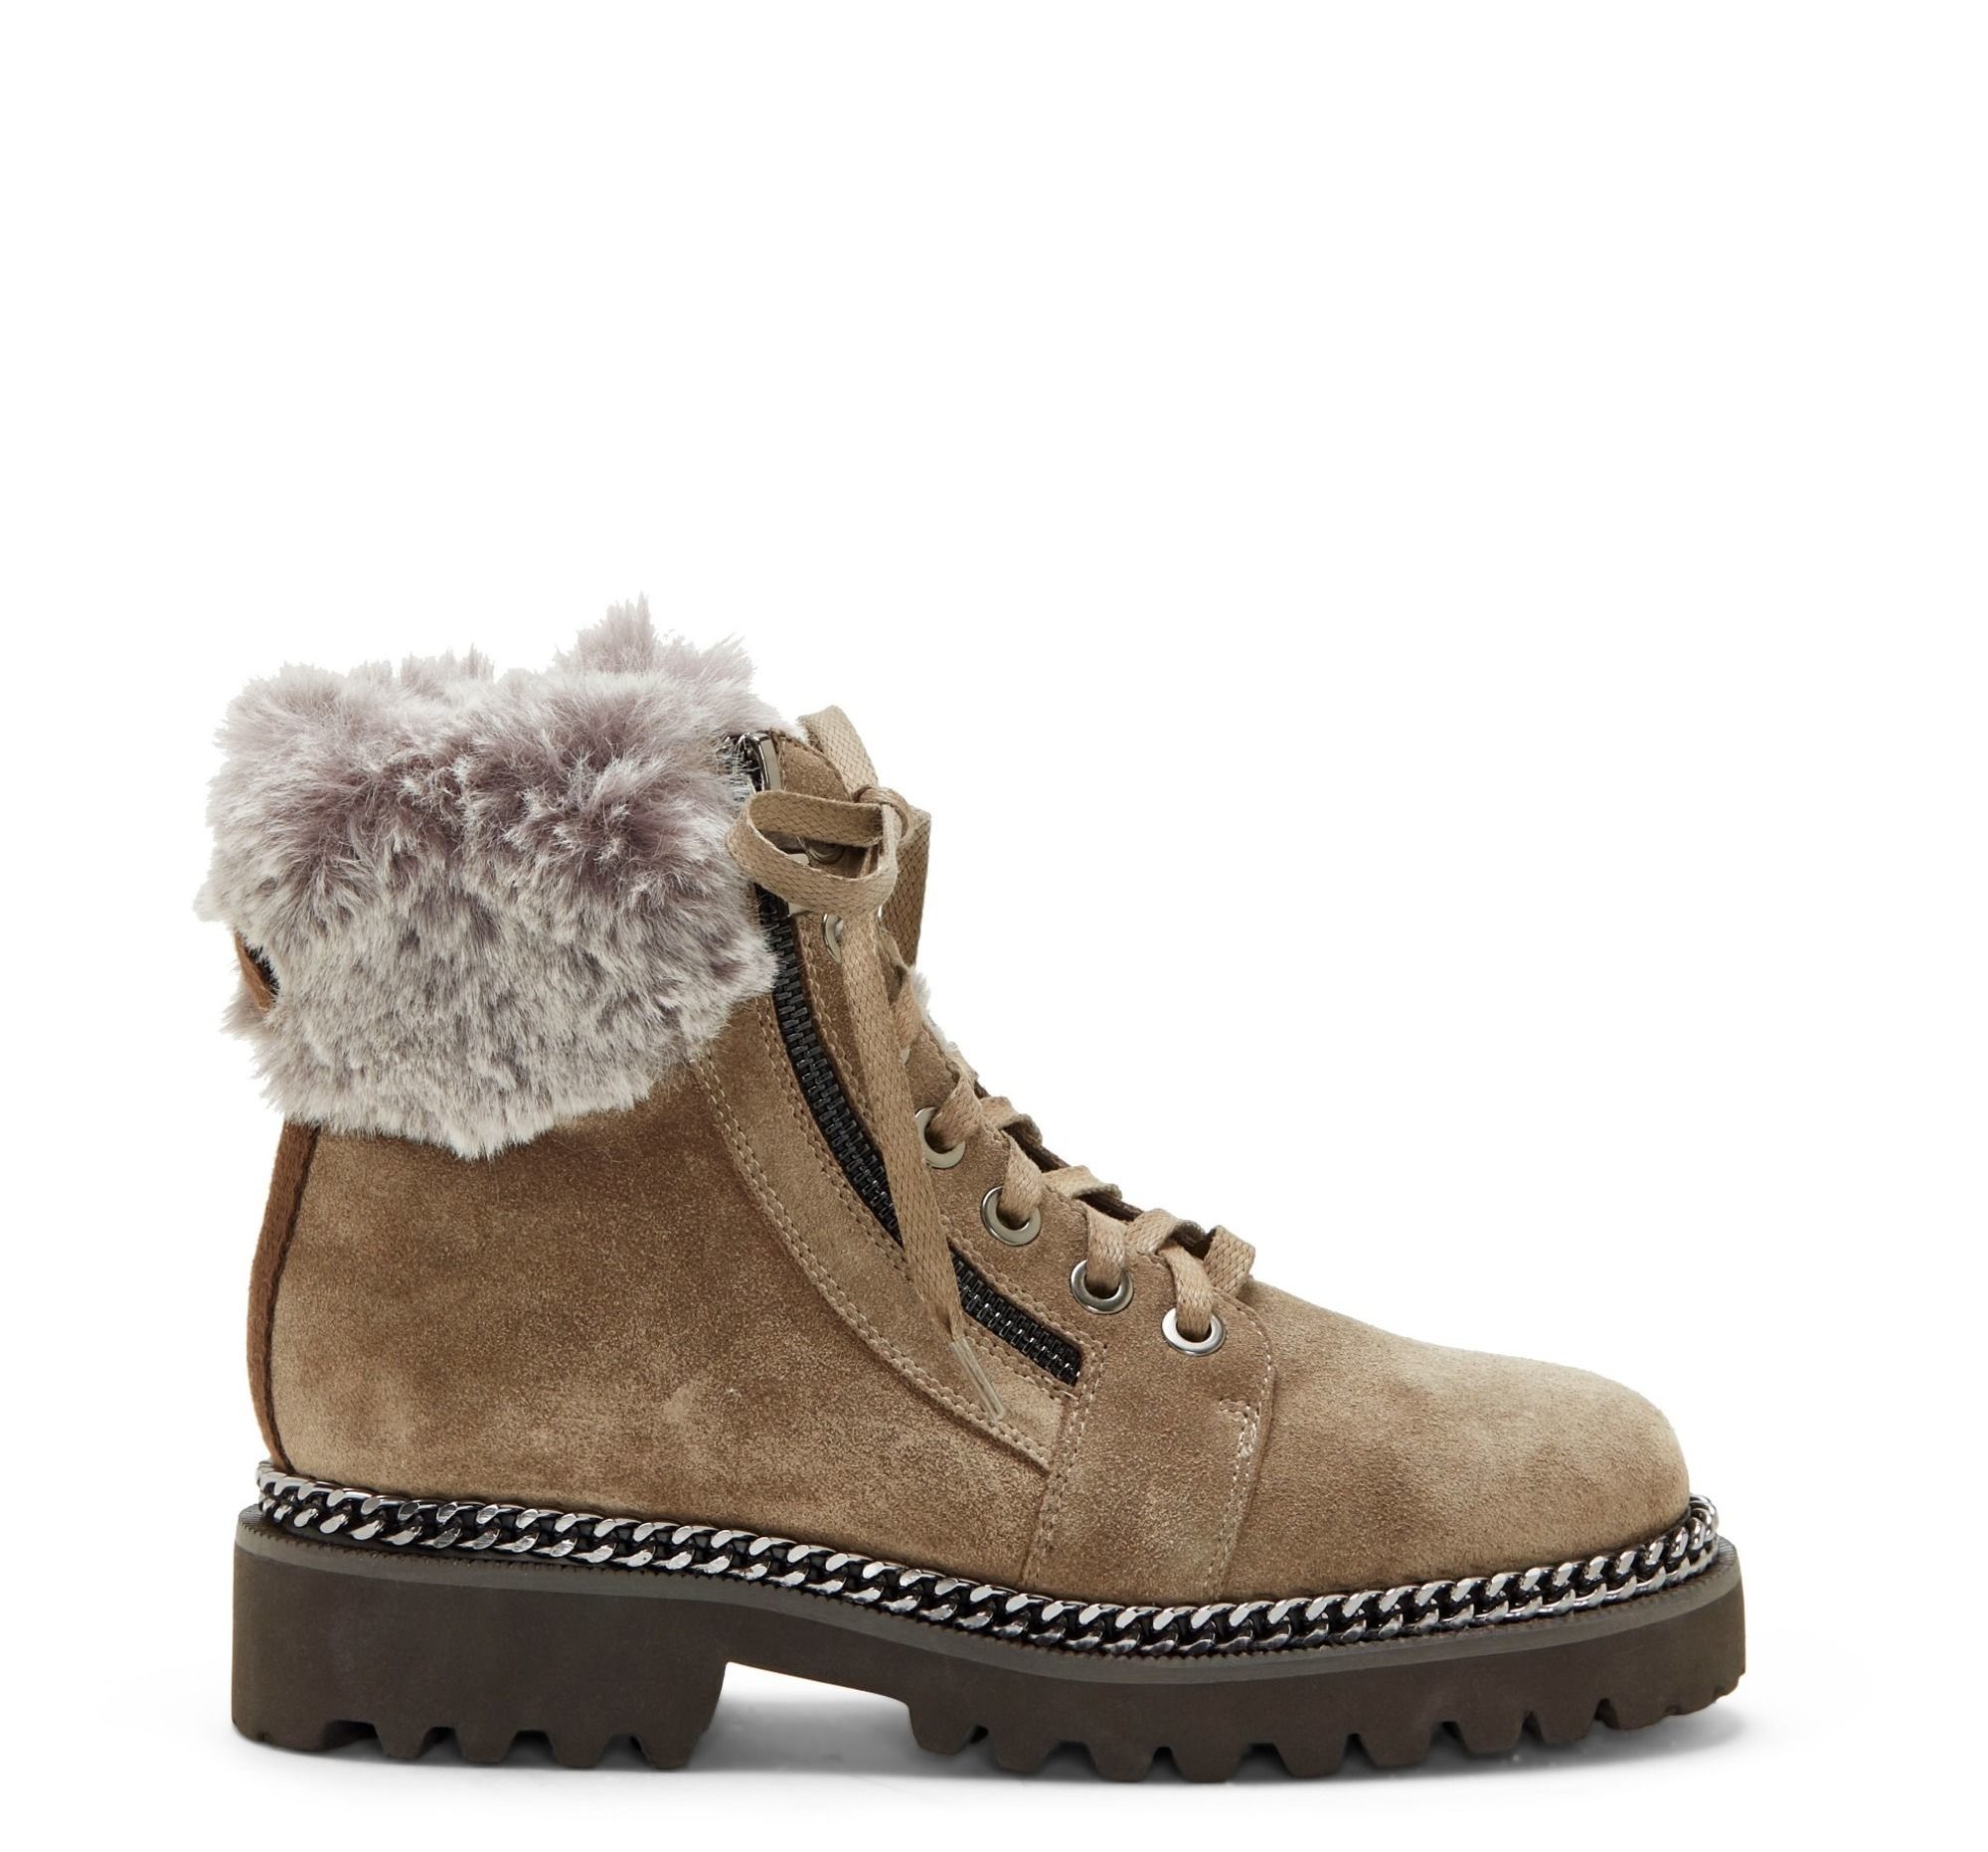 5 fabulous fur-trimmed booties for fall and winter. Love this trend!